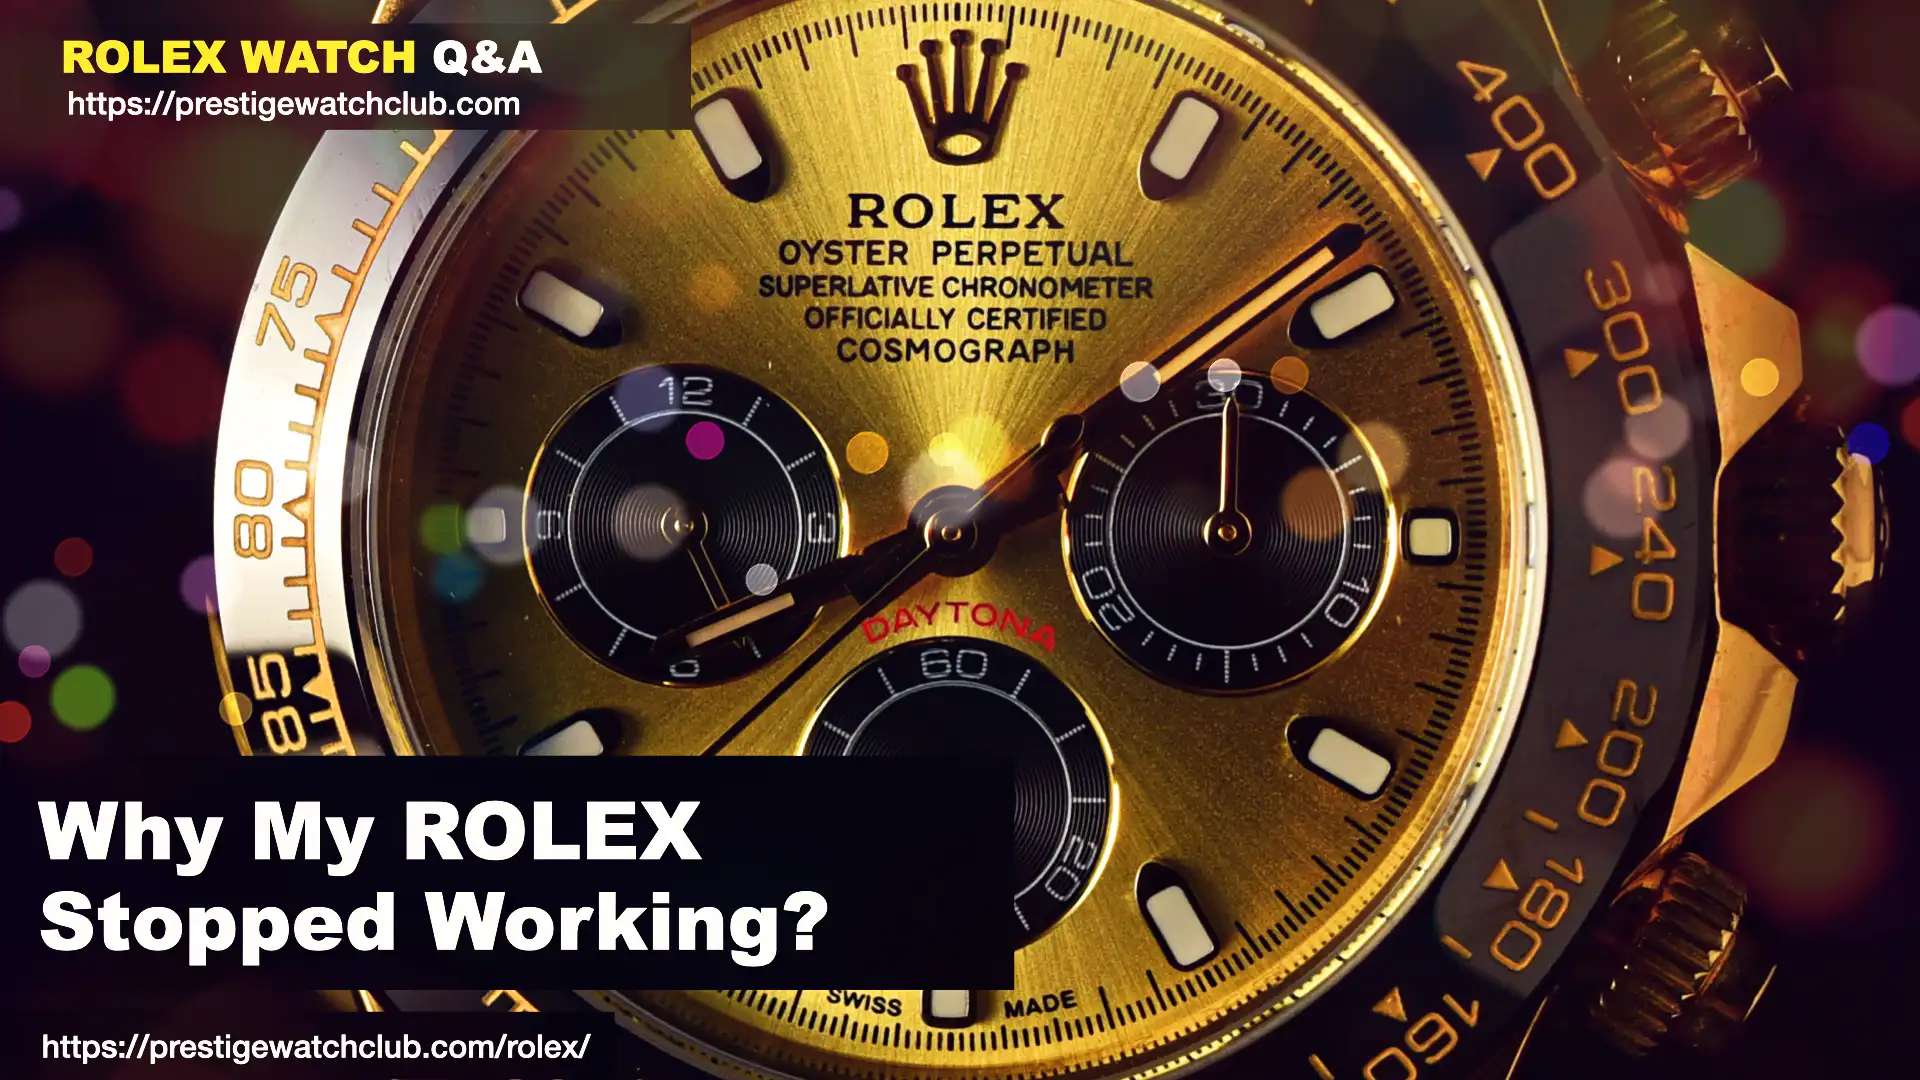 Why My Rolex Stopped Working?